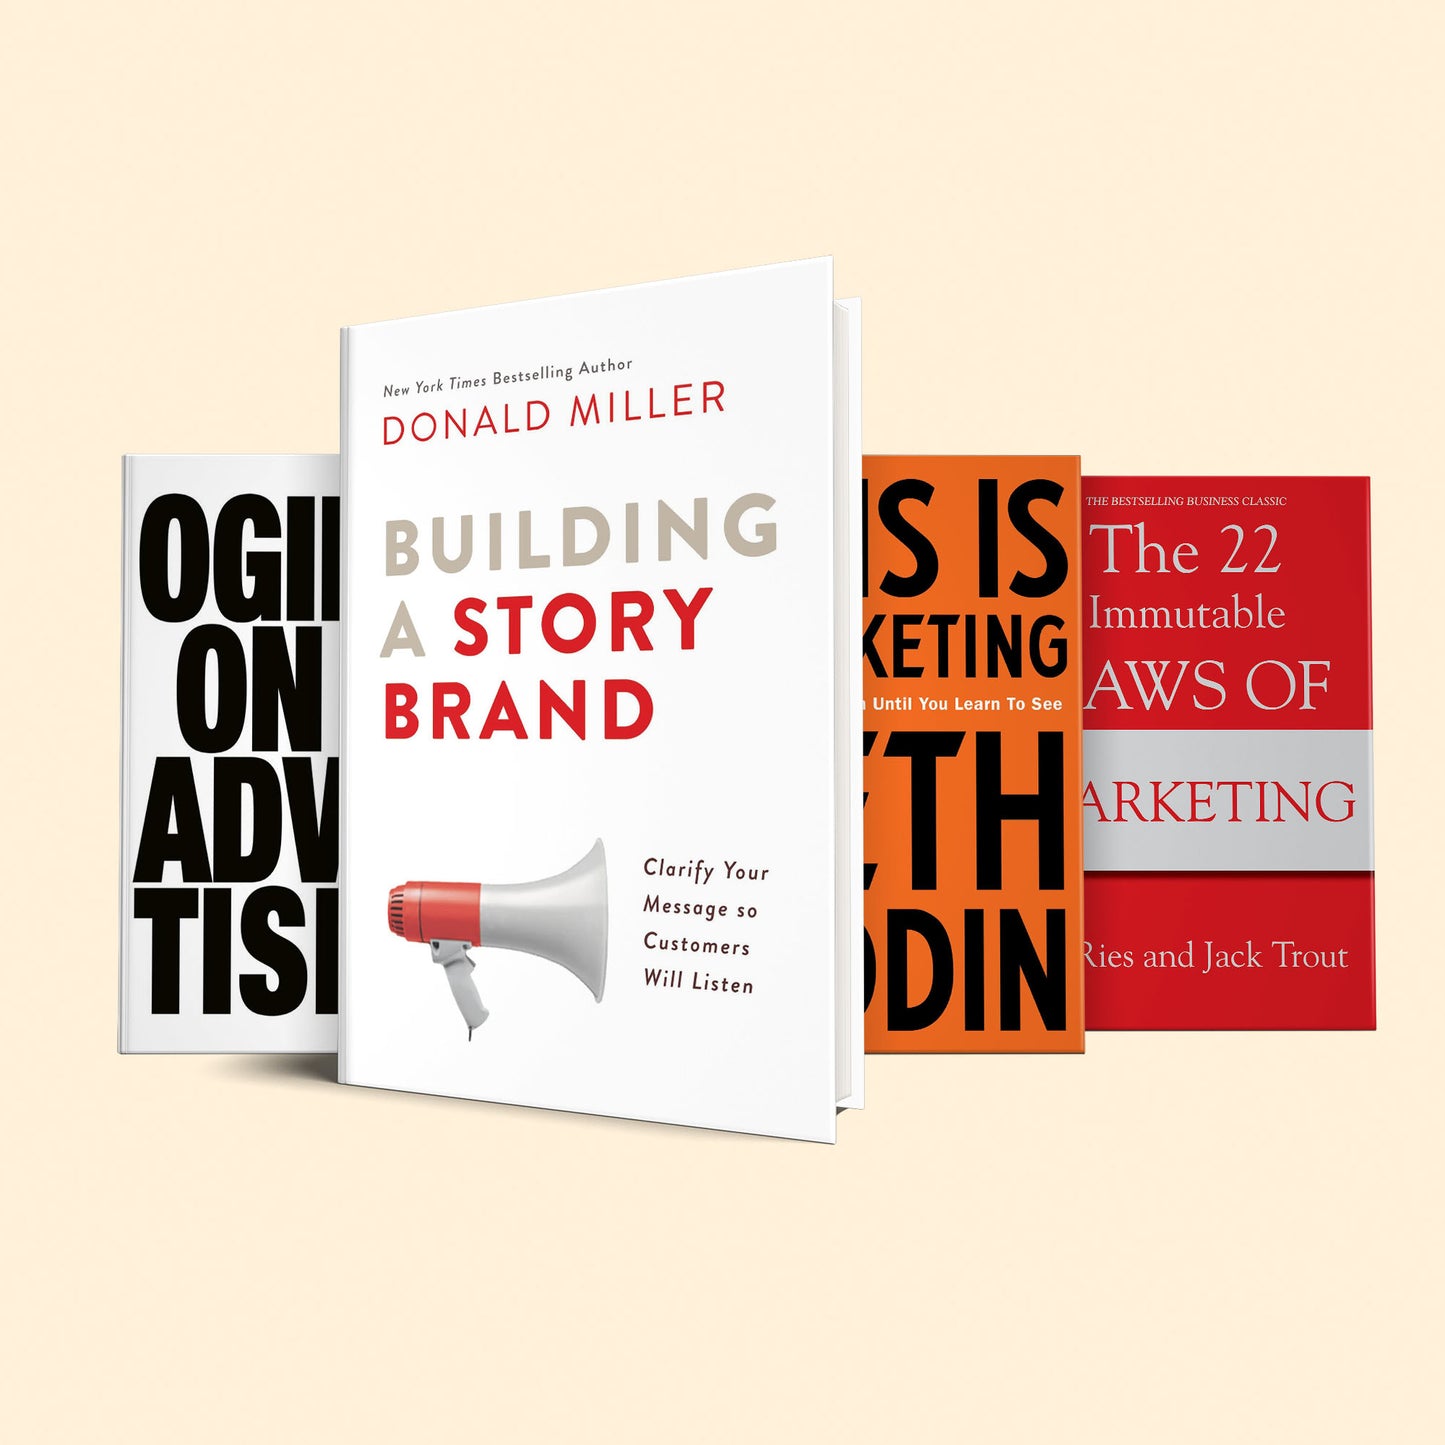 5 Books for the elite marketer: (Building a story brand, This is marketing, ogilvy on advertising, The 22 Immutable Laws of Marketing,Contagious)